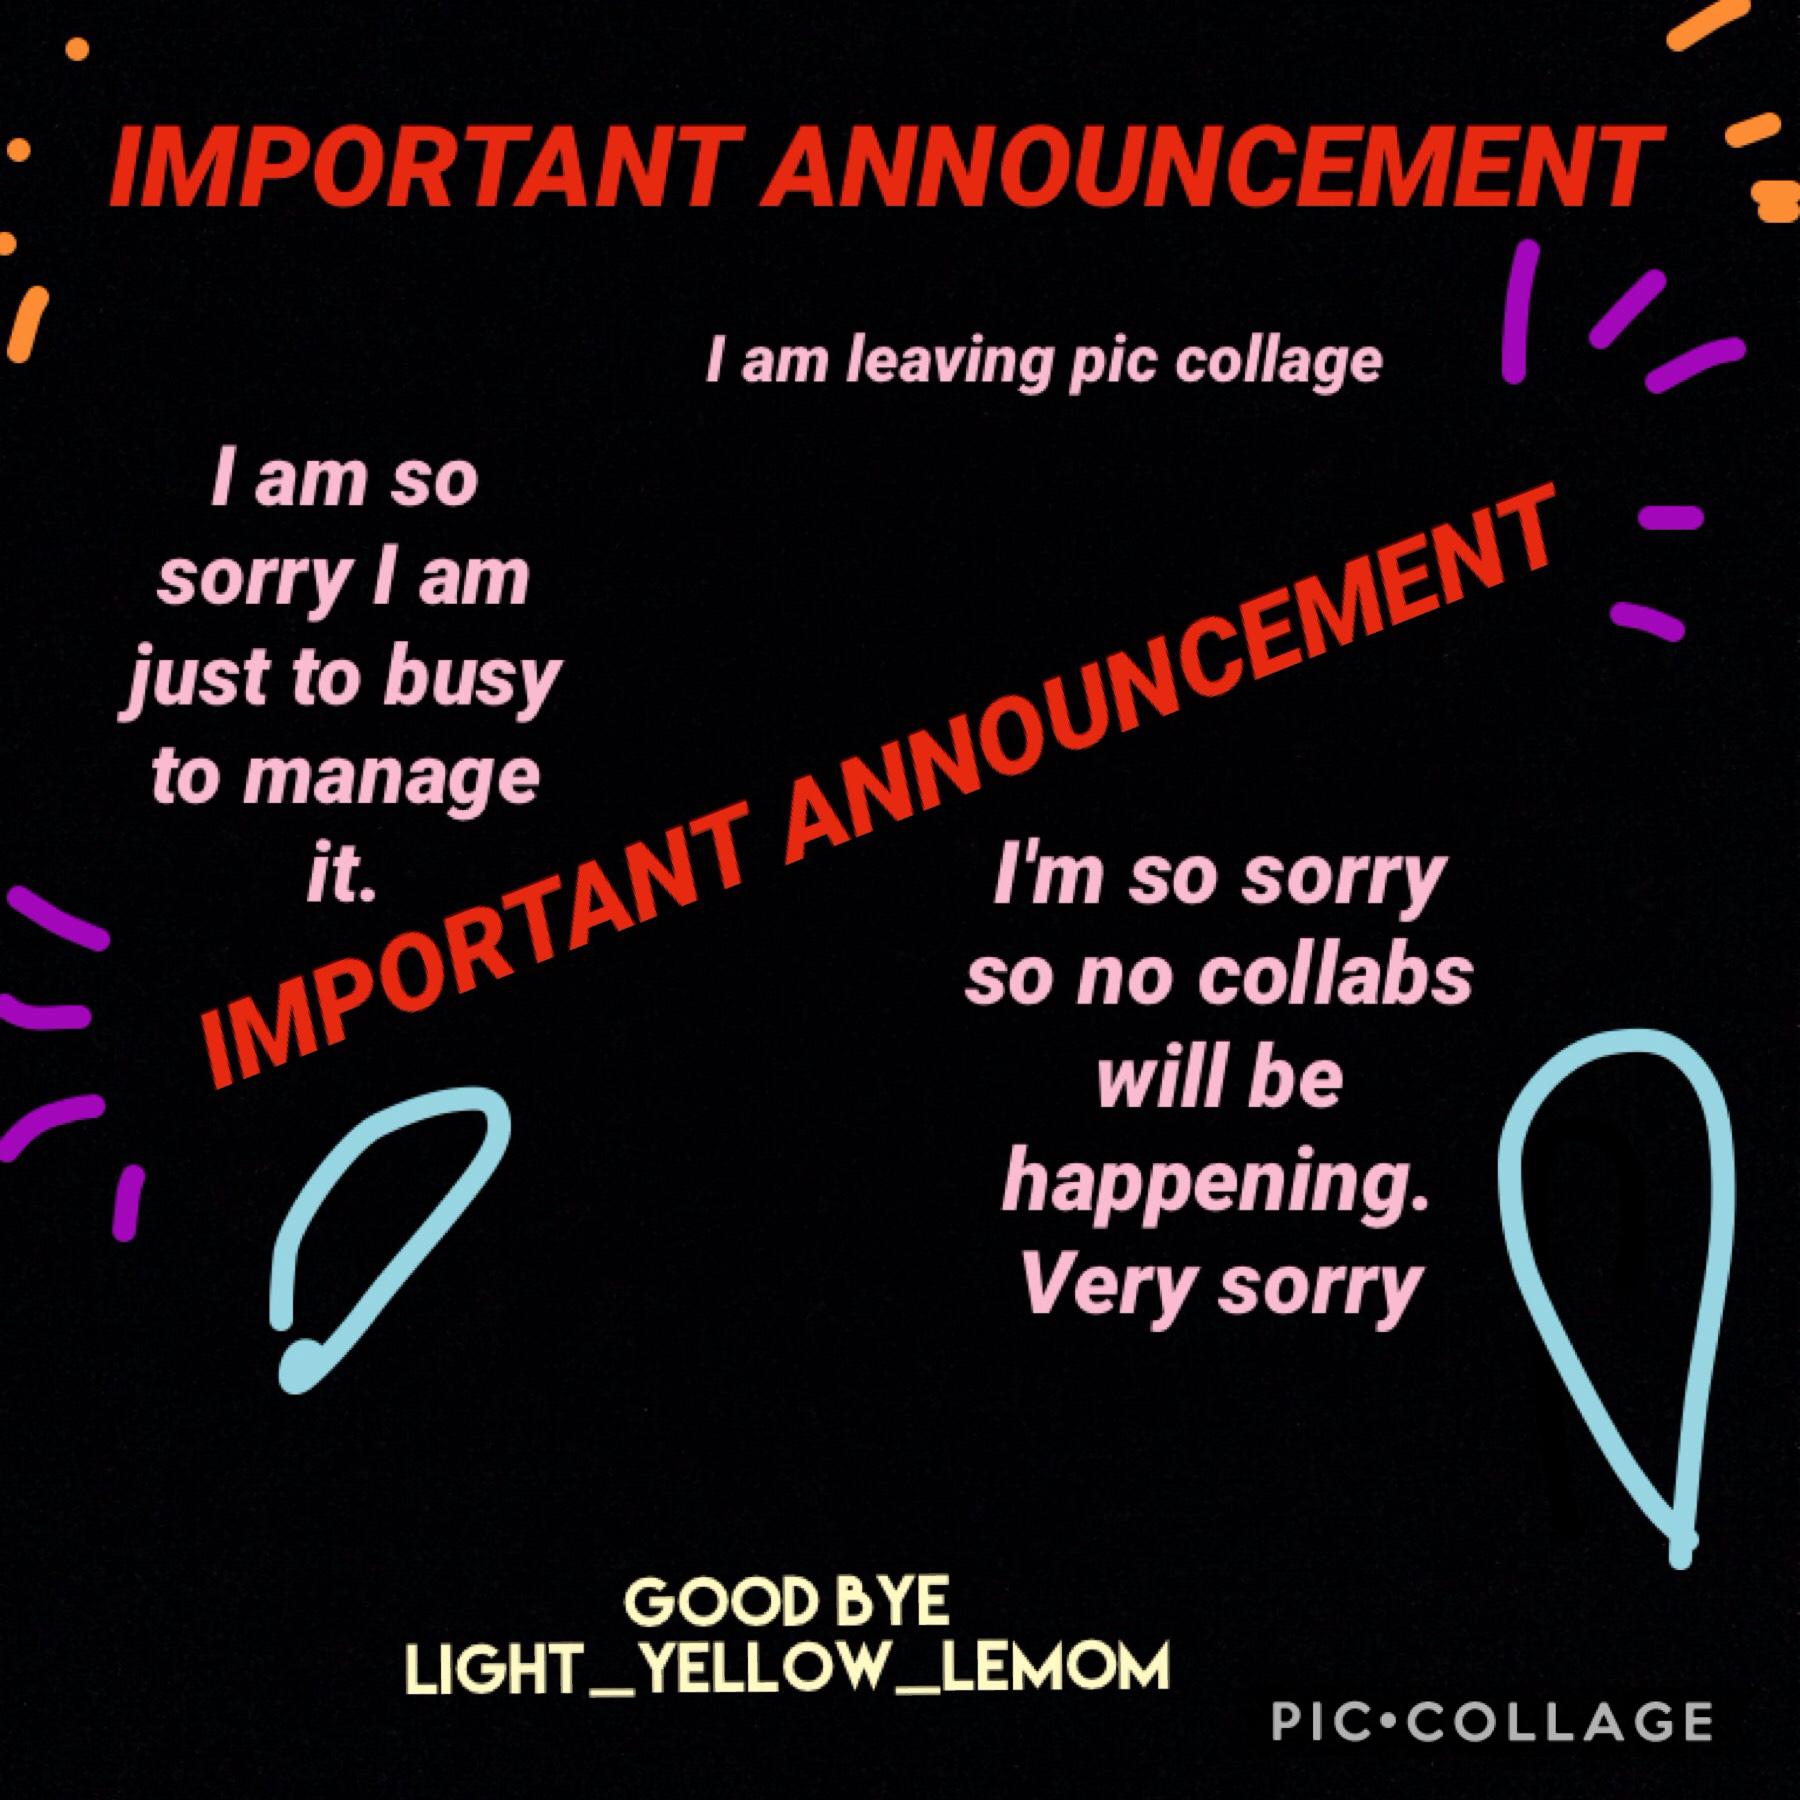 So sorry I'm leaving my account will still be up but I will not be active at all